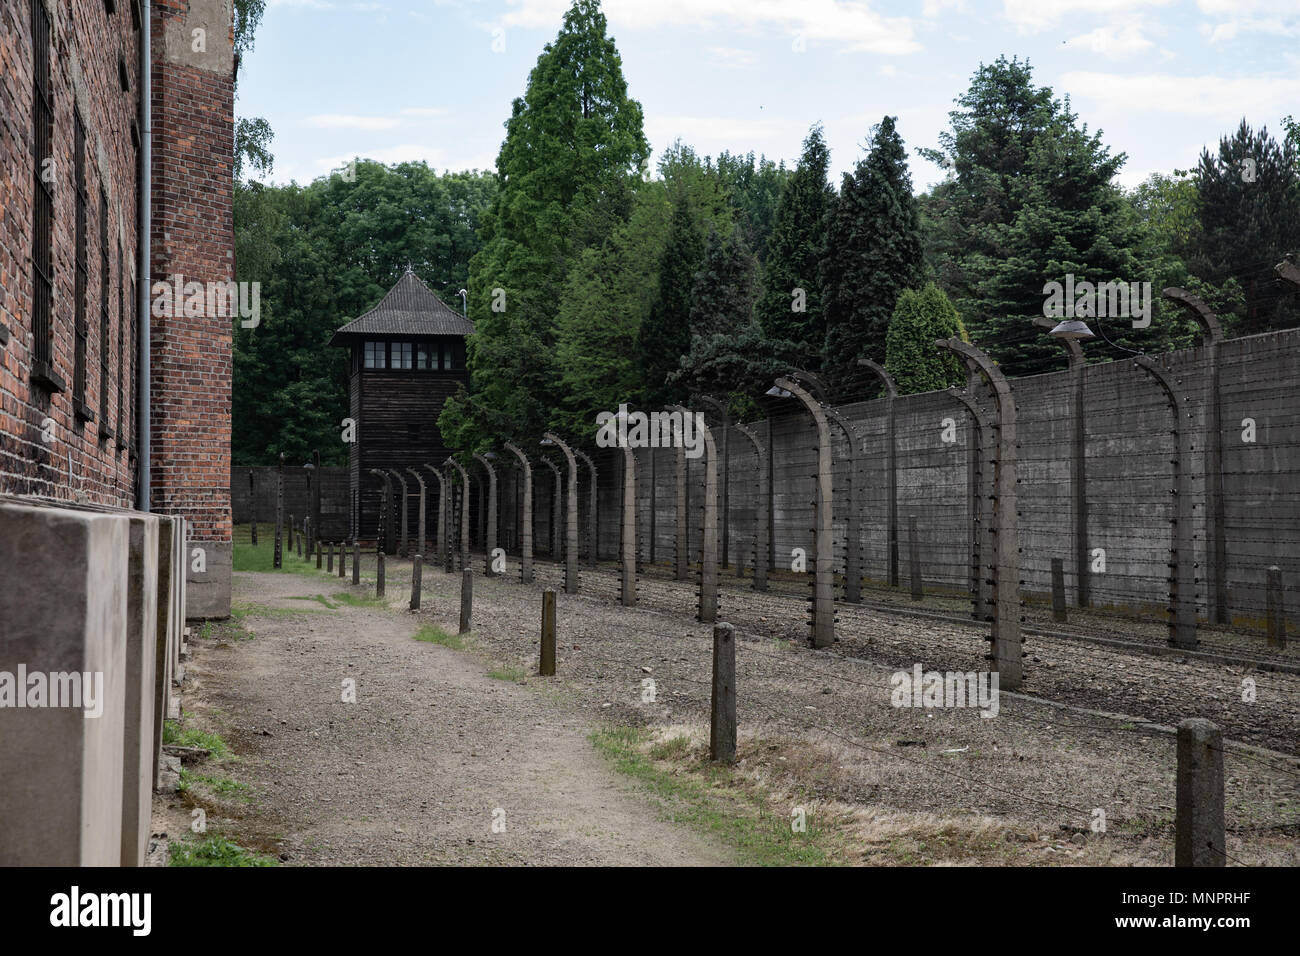 Inside the barbed wire fence at the Nazi Concentration Camp Auschwitz Stock Photo